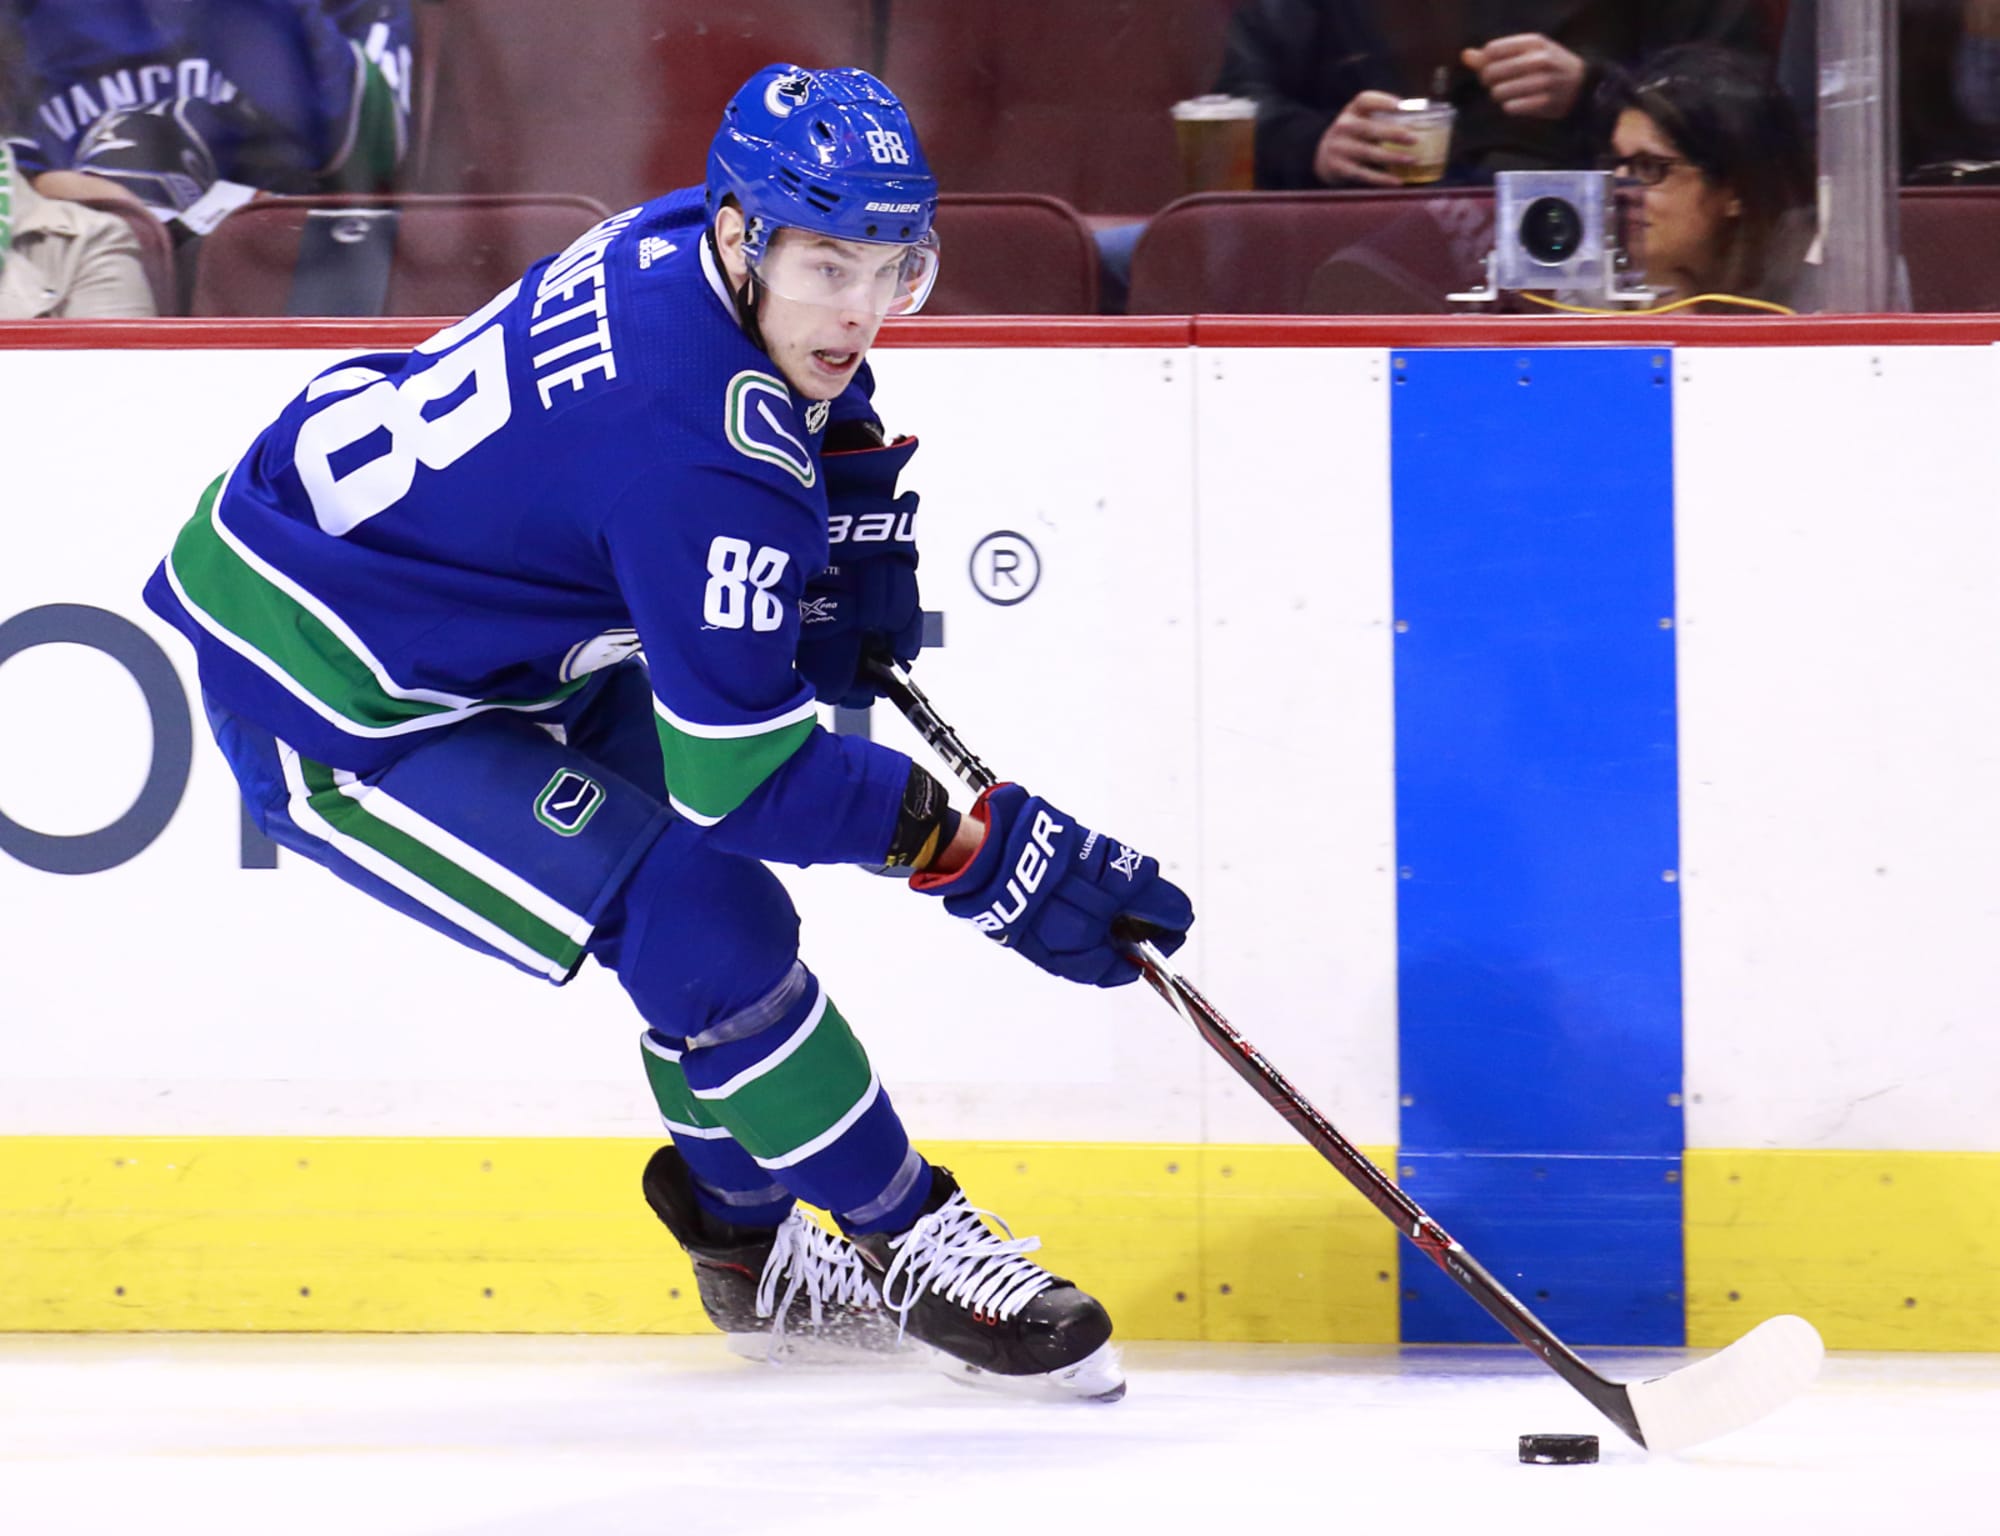 Vancouver Canucks 3 takeaways from the final preseason game